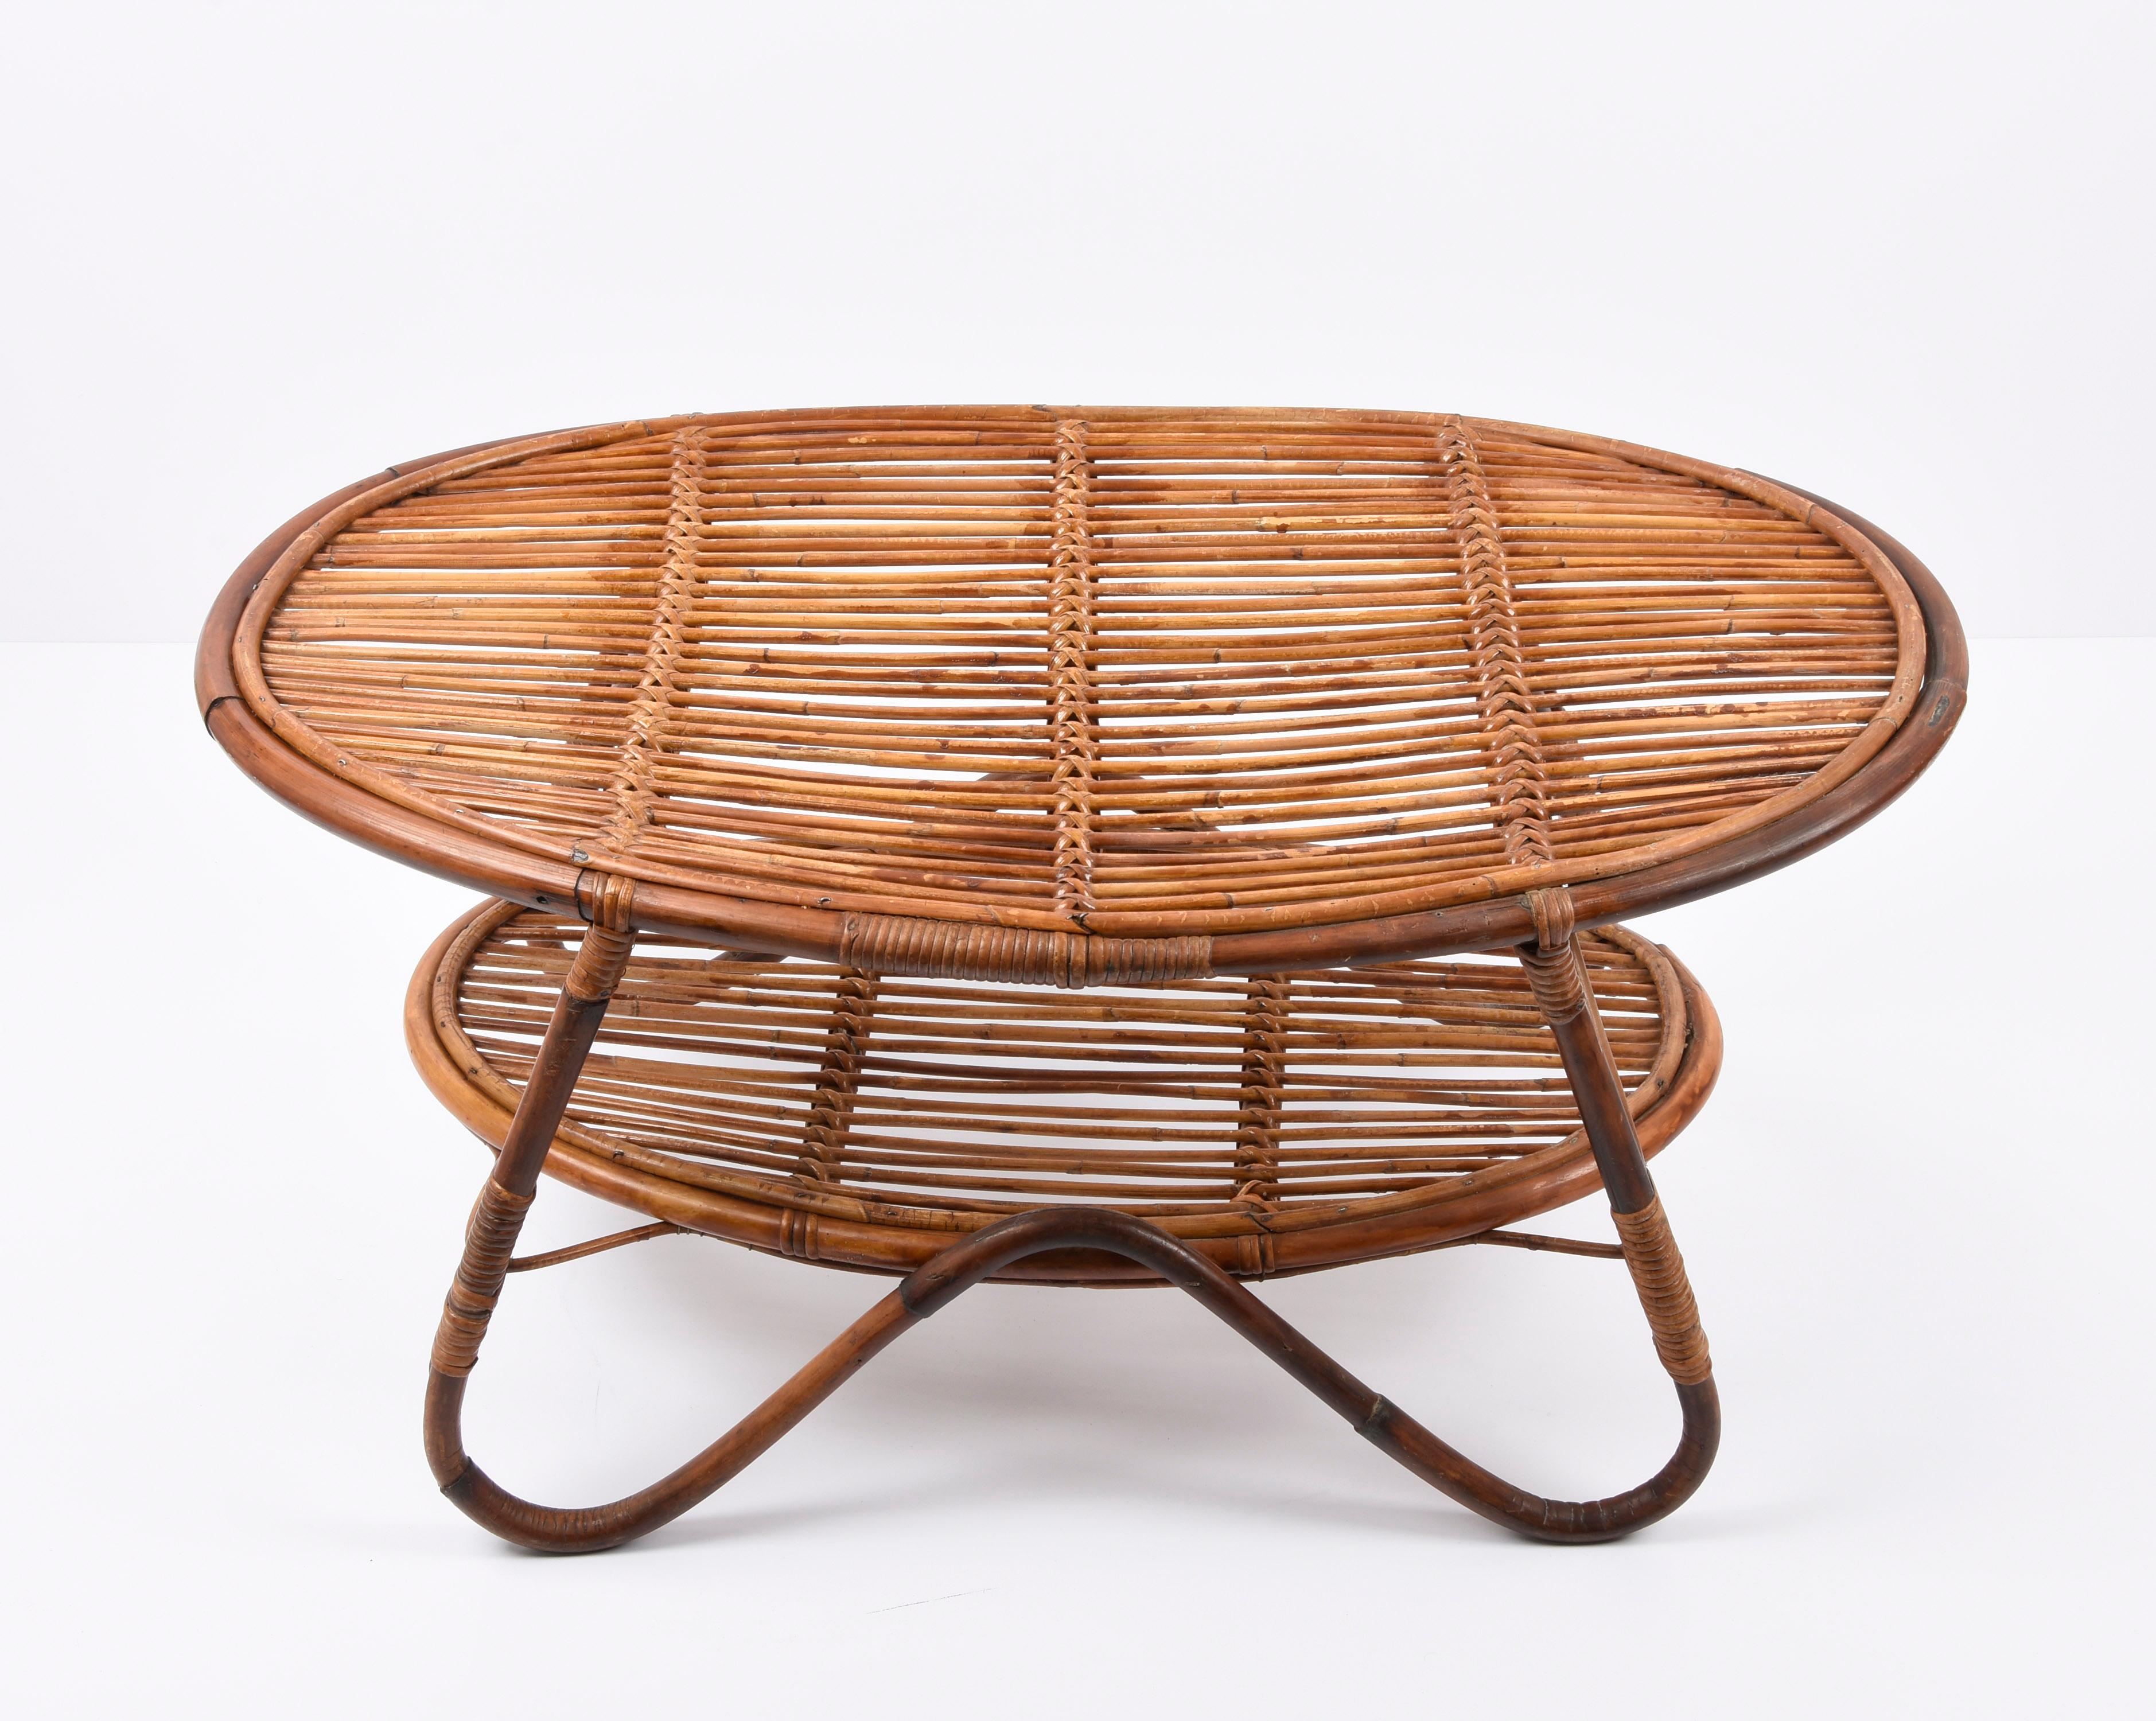 Midcentury Italian Oval Rattan and Bamboo Two Levels Coffee Table, 1950s For Sale 6